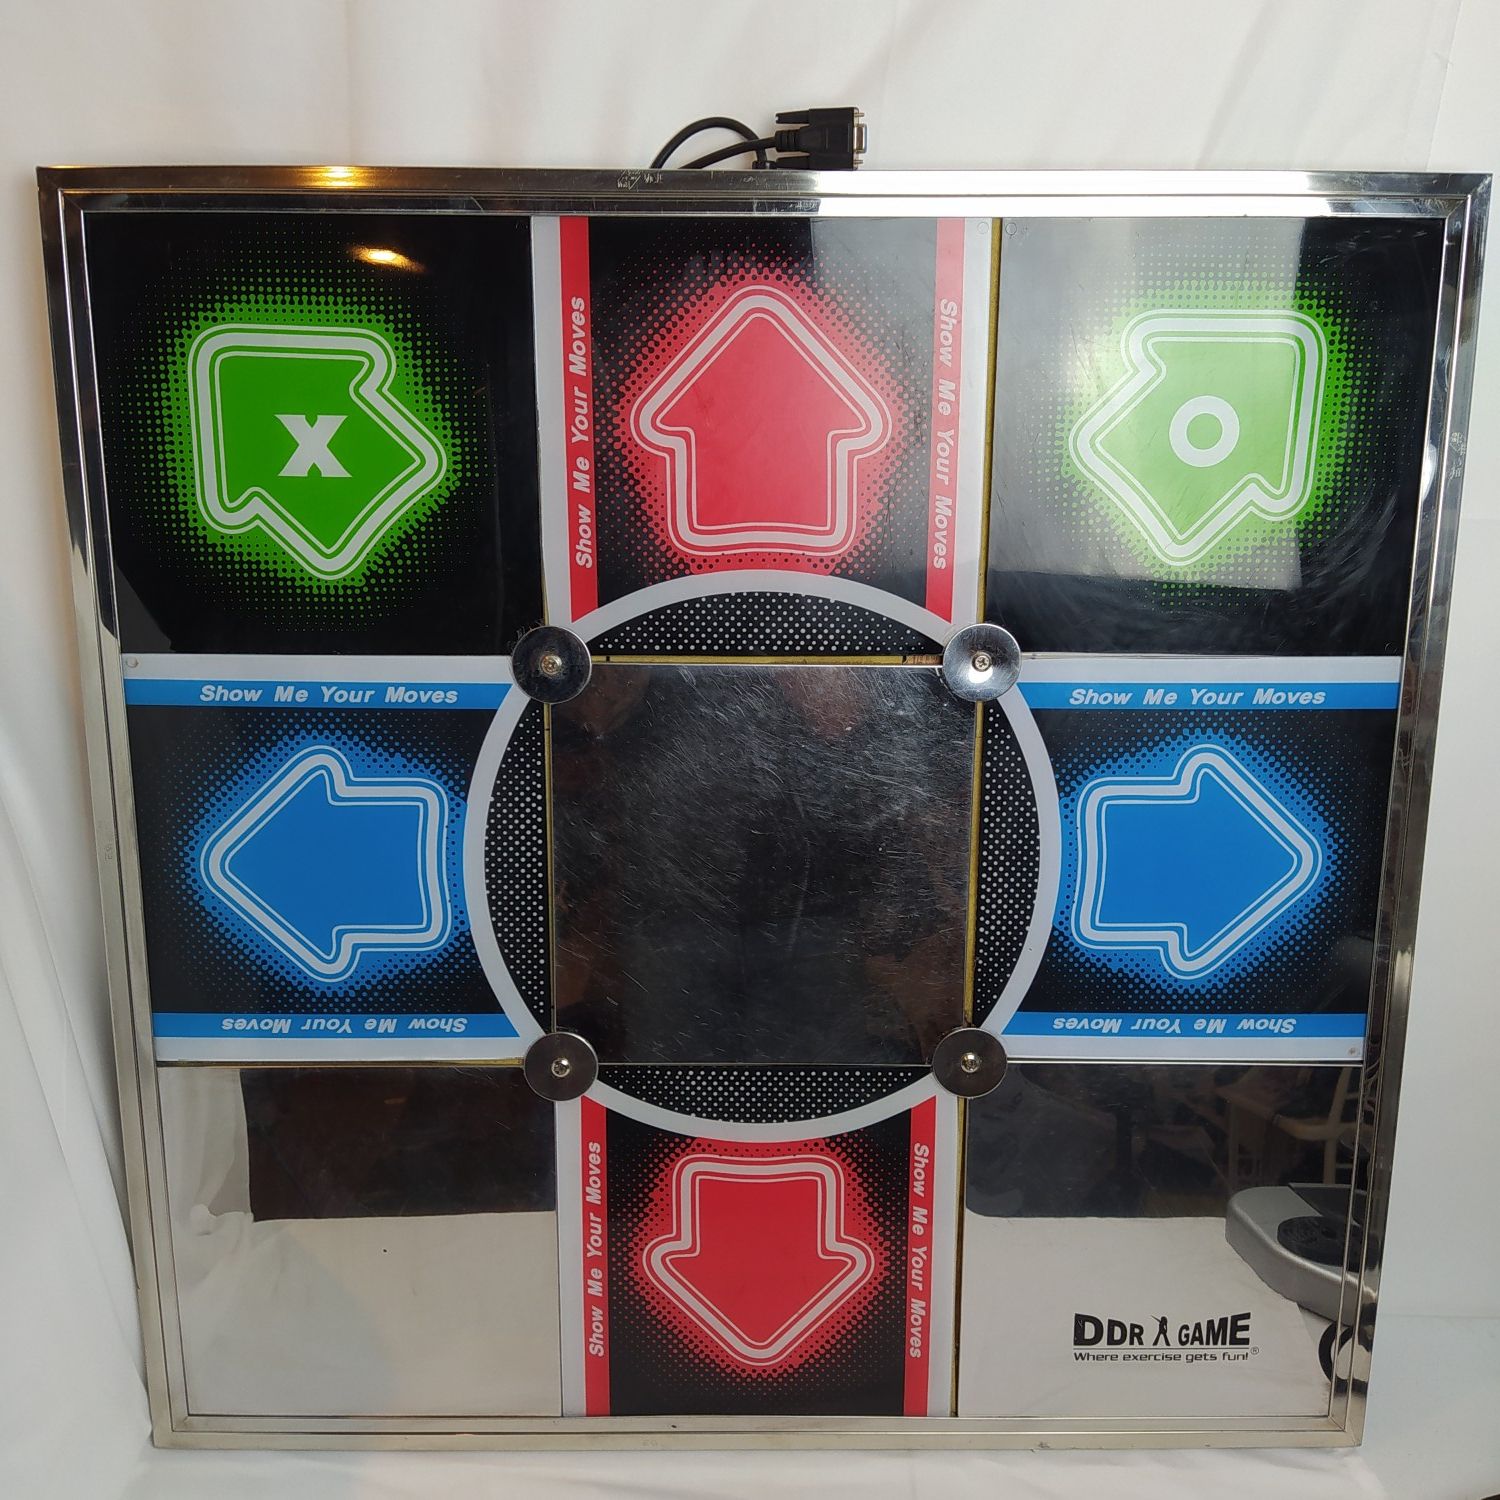 Ddr arcade dance pad for ps2, pc, Wii, Xbox.